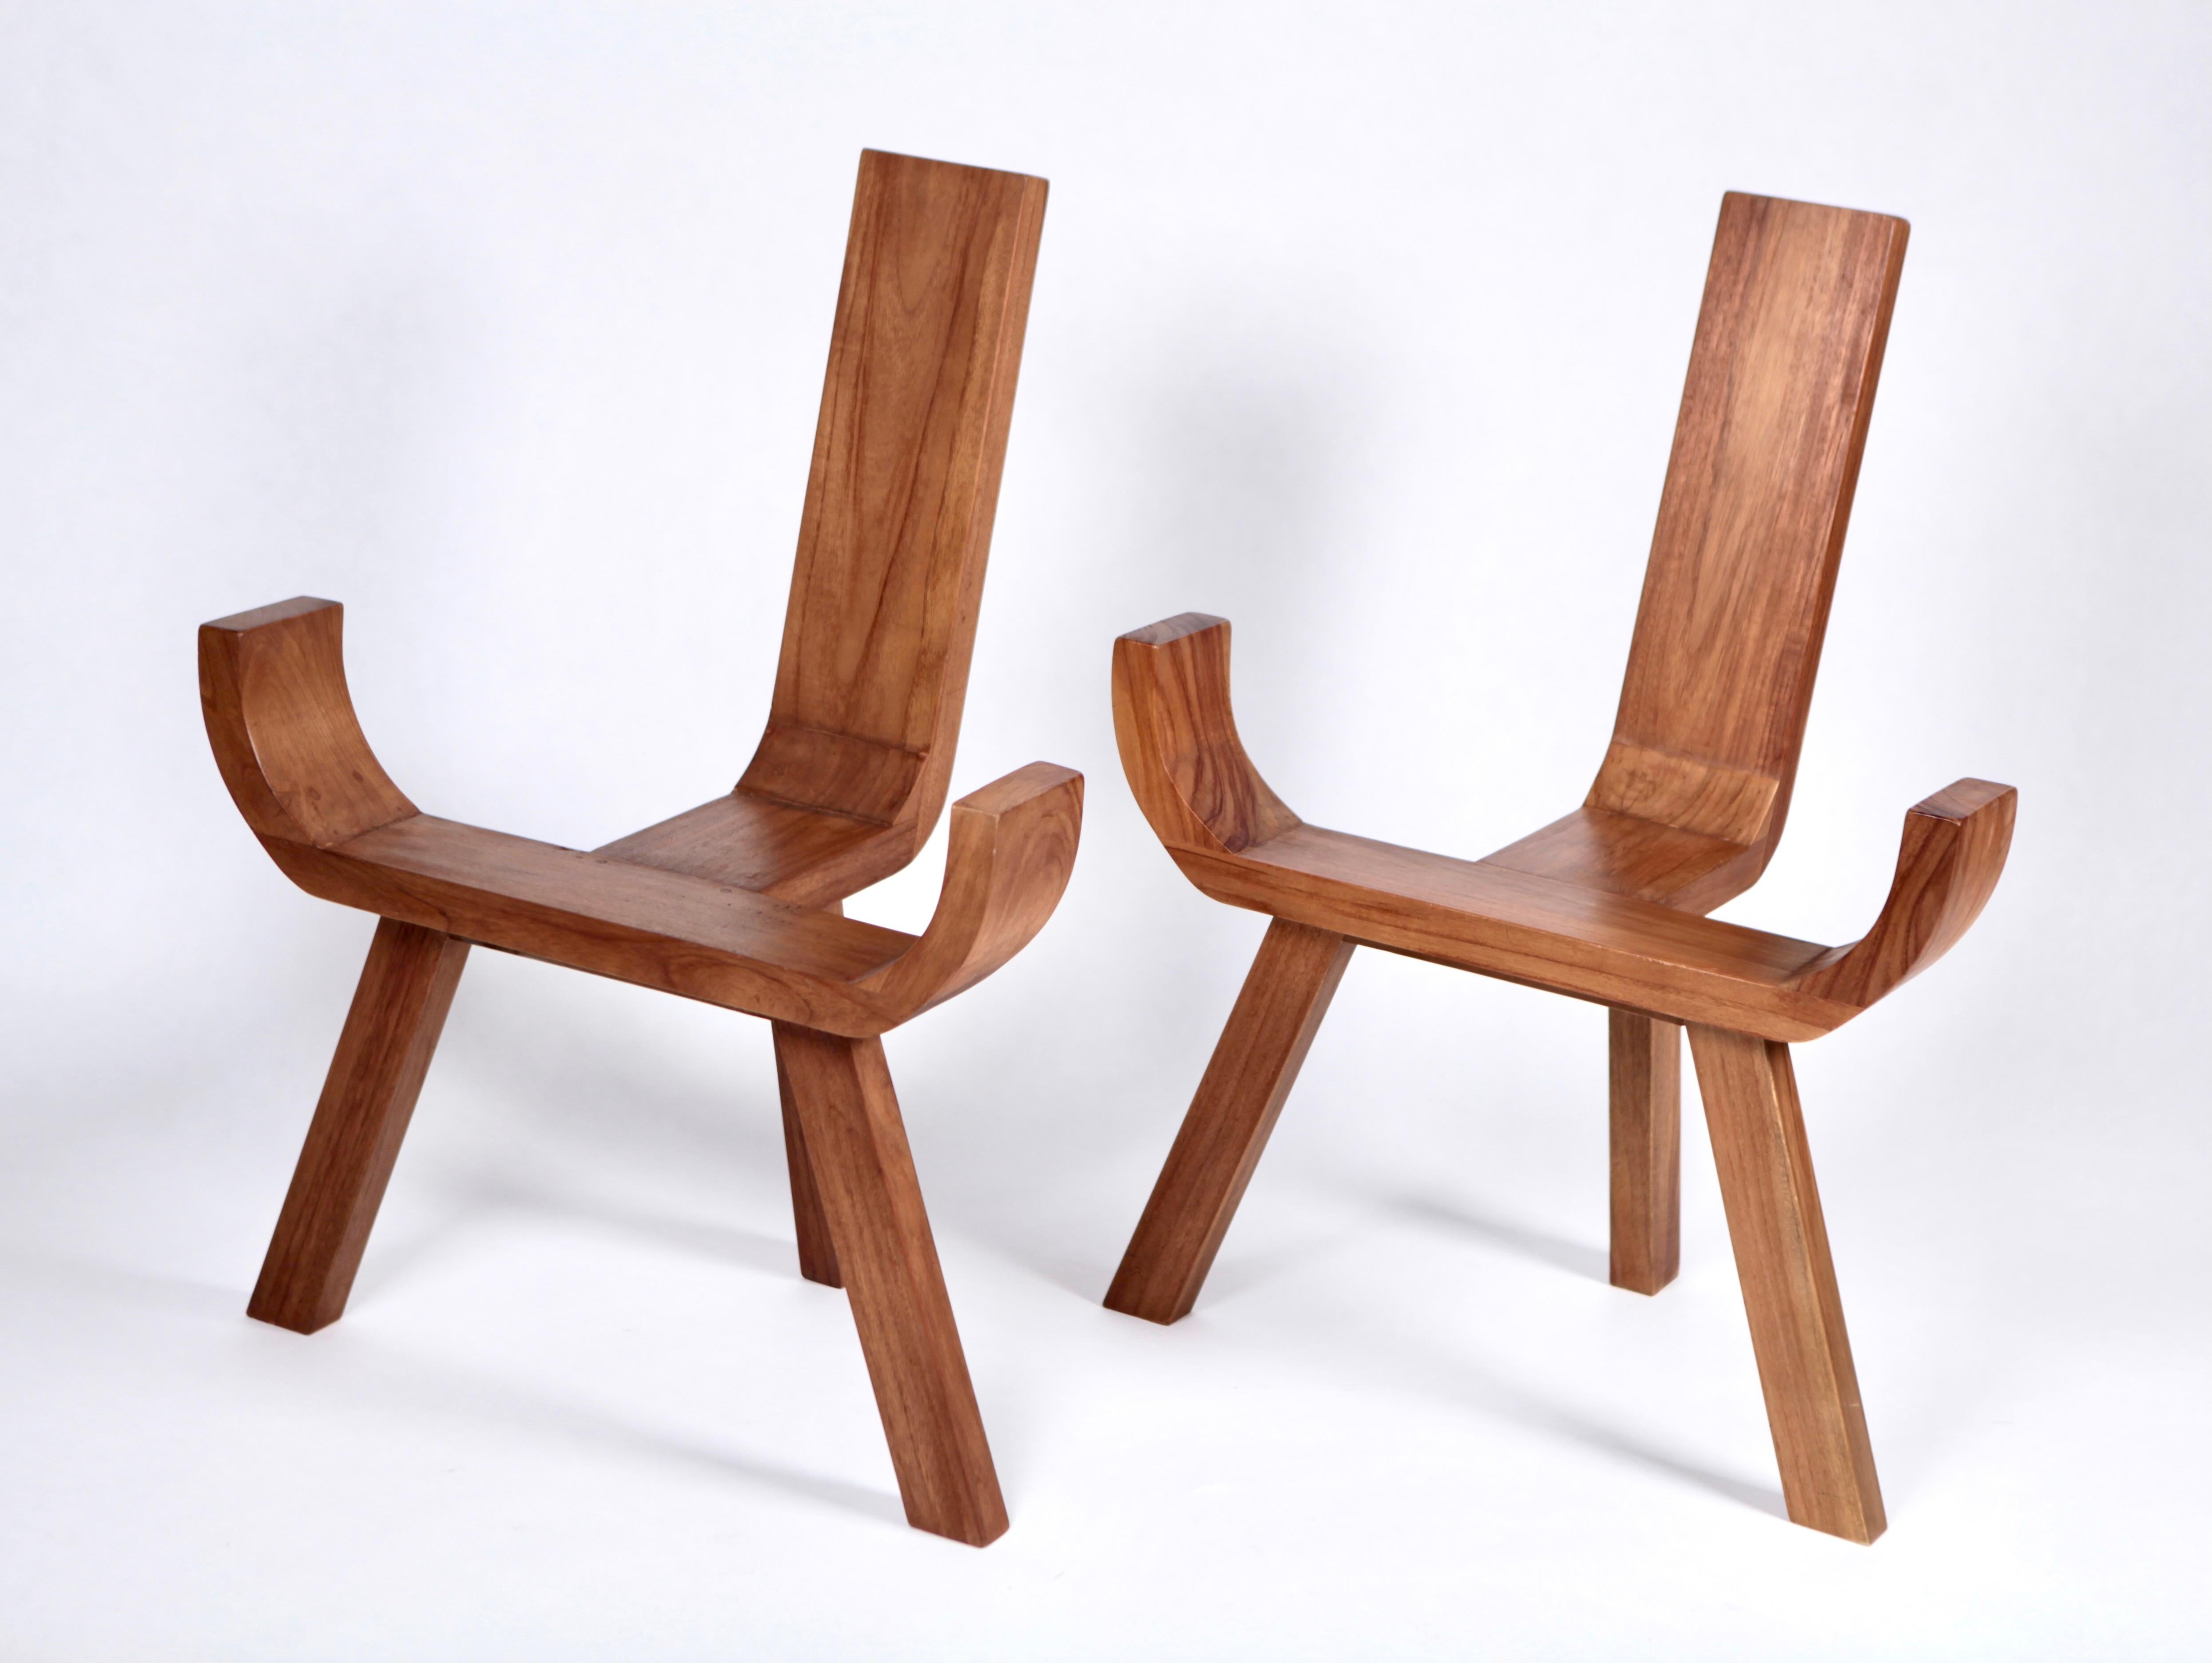 Sculptural Danish Easy Chairs, Solid Teak, 1960s For Sale 12